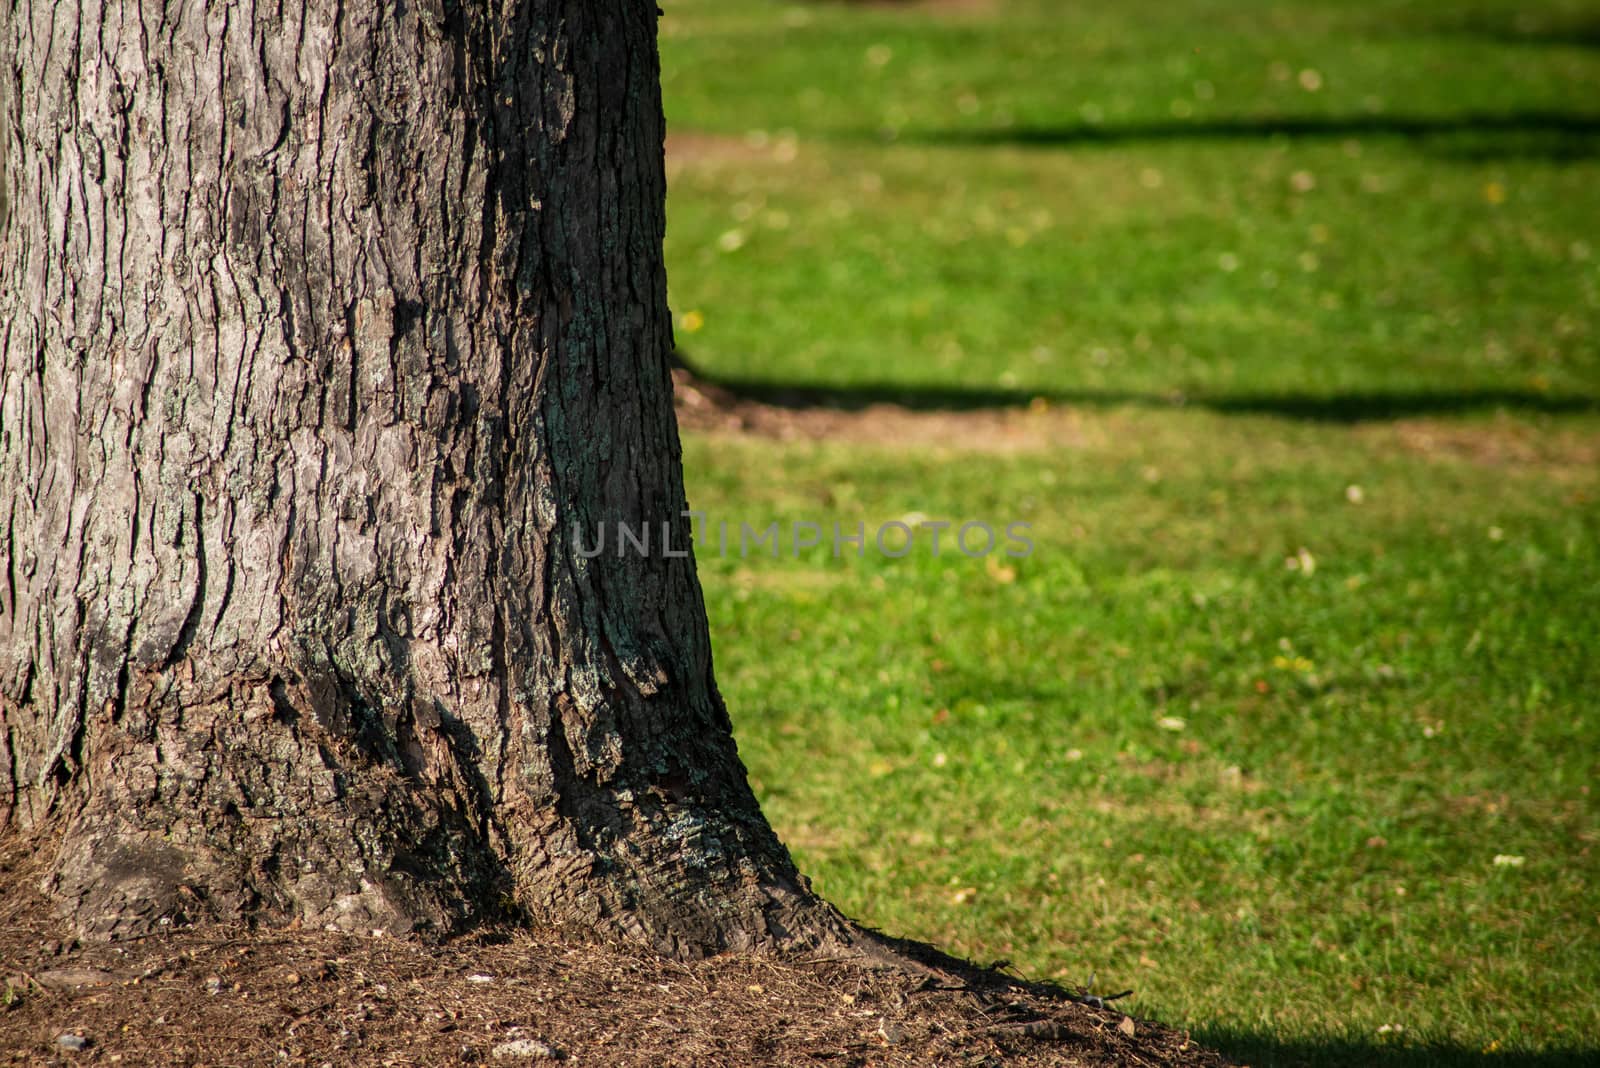 Full frame image of rough-textured tree bark on a heft trunk with defocused green grass background.